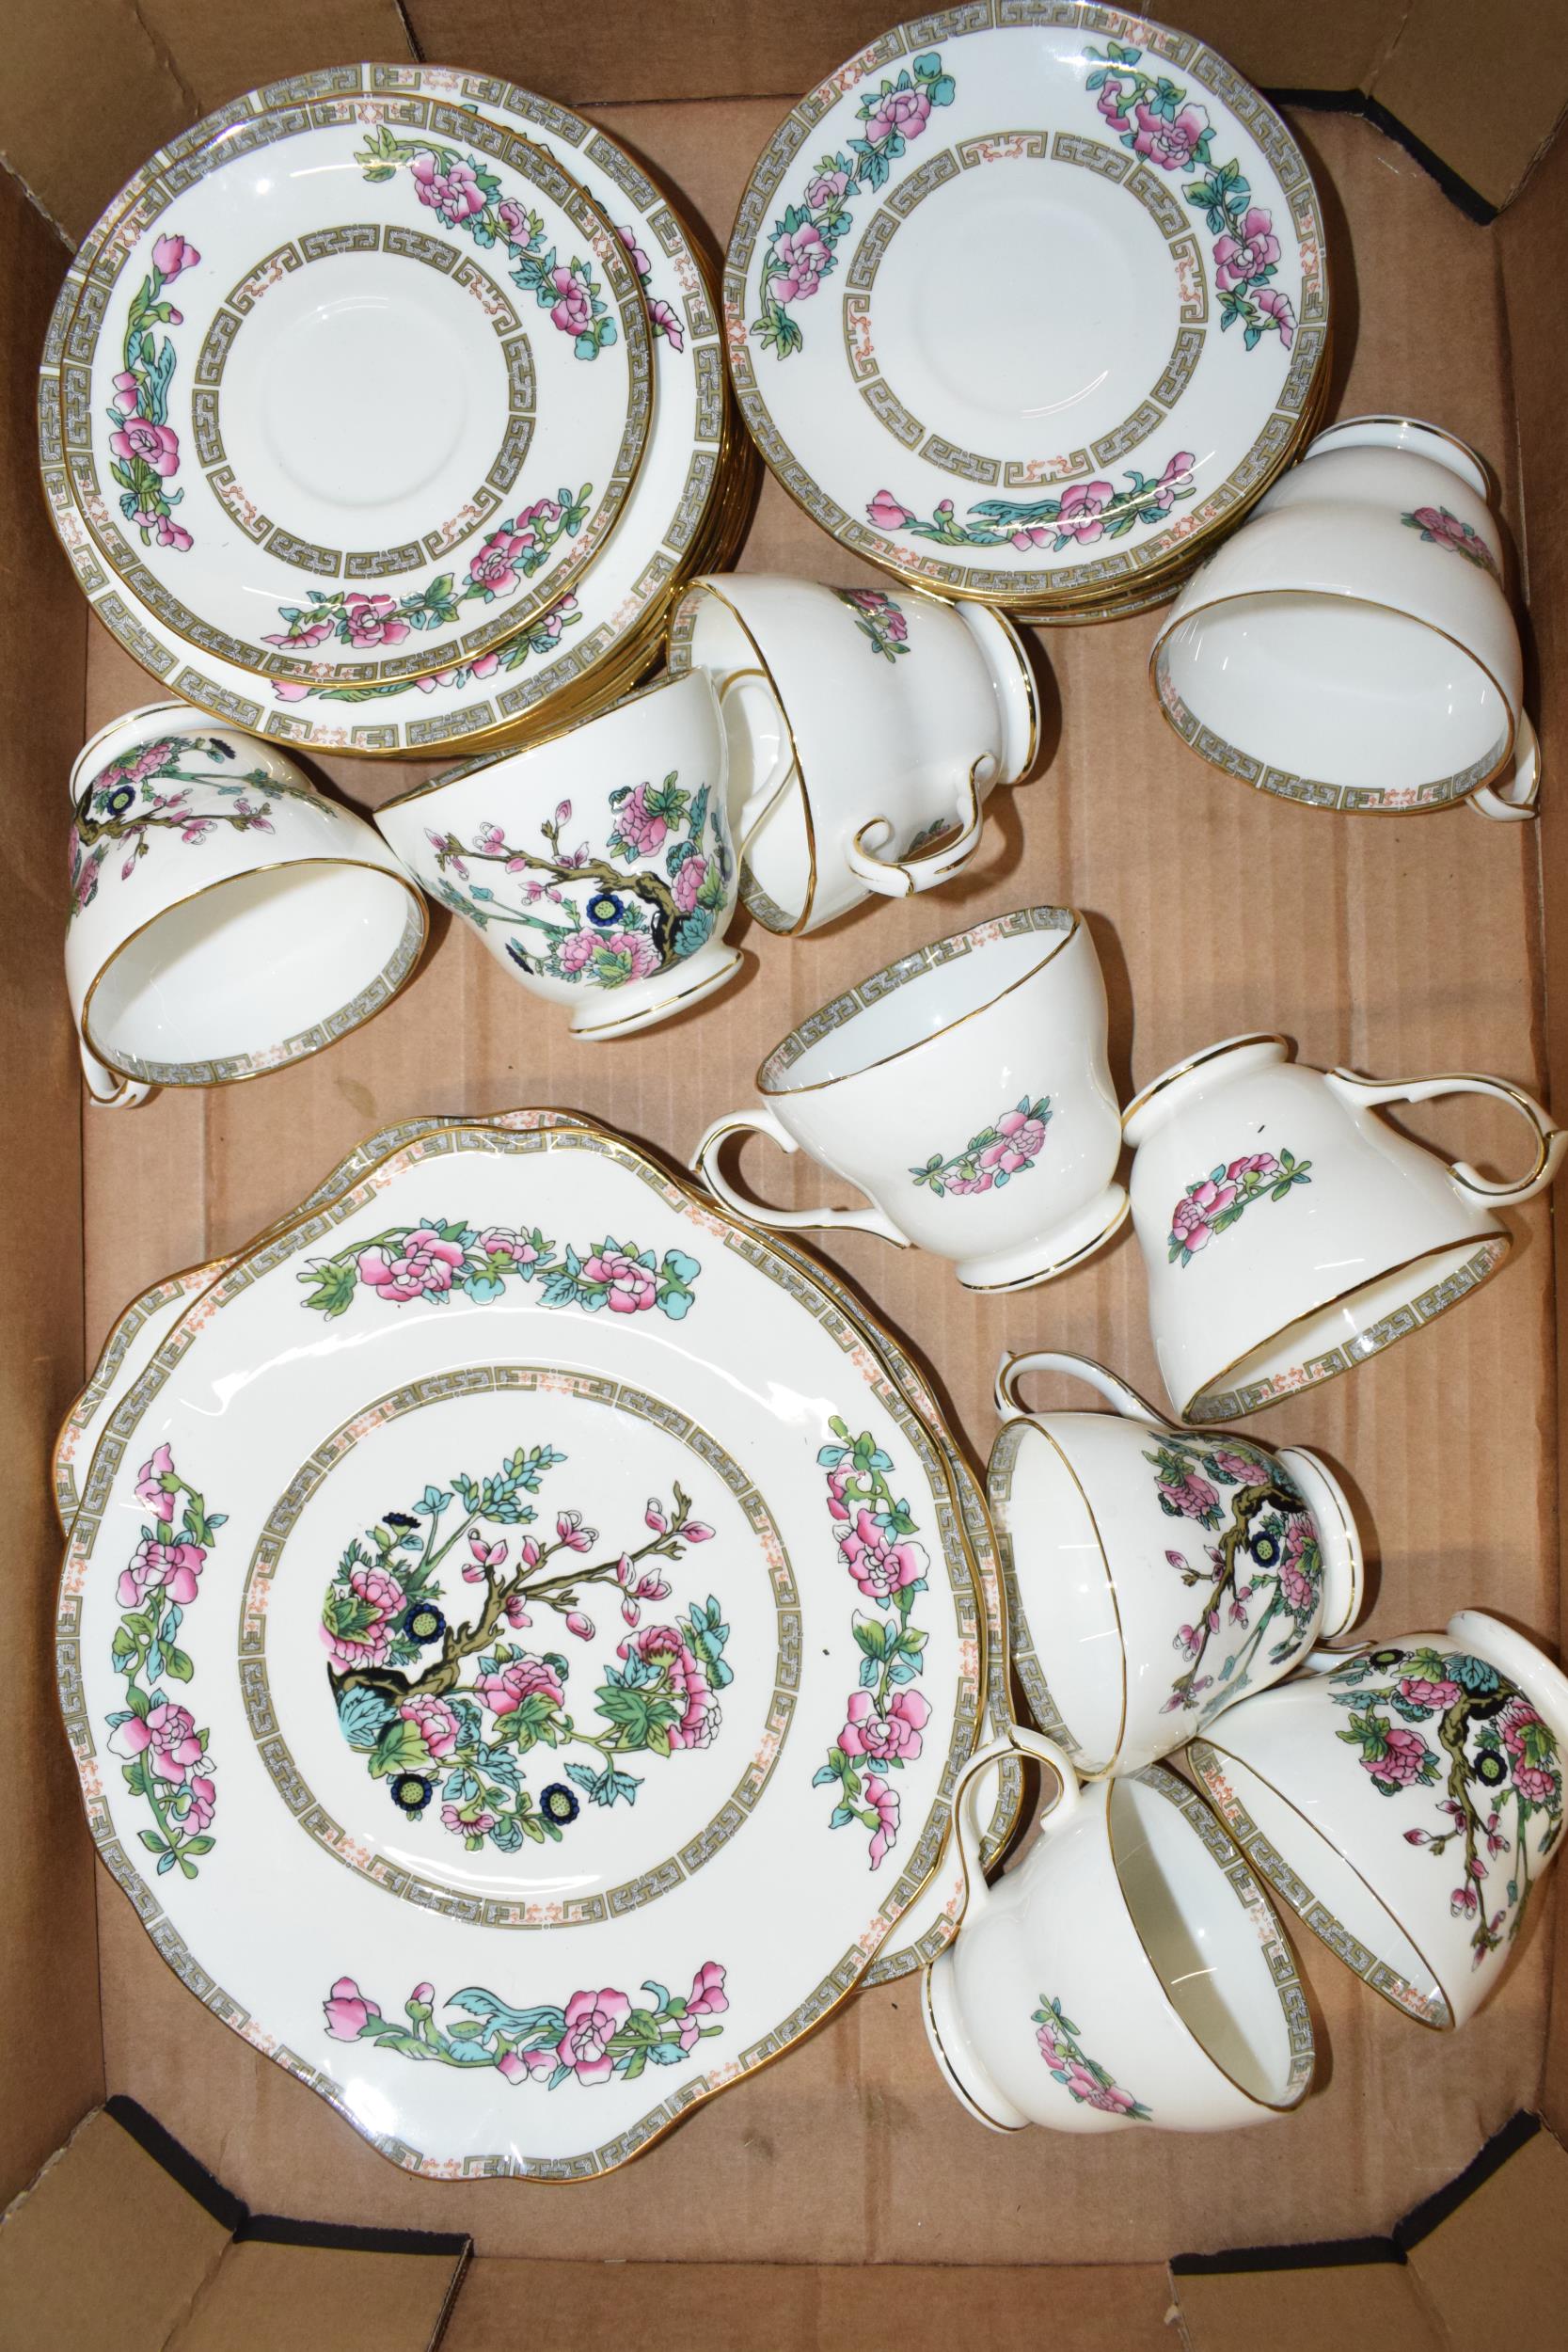 Duchess tea ware in the Old Indian Tree design to include 9 trios of 3 serving plates (approx 30).